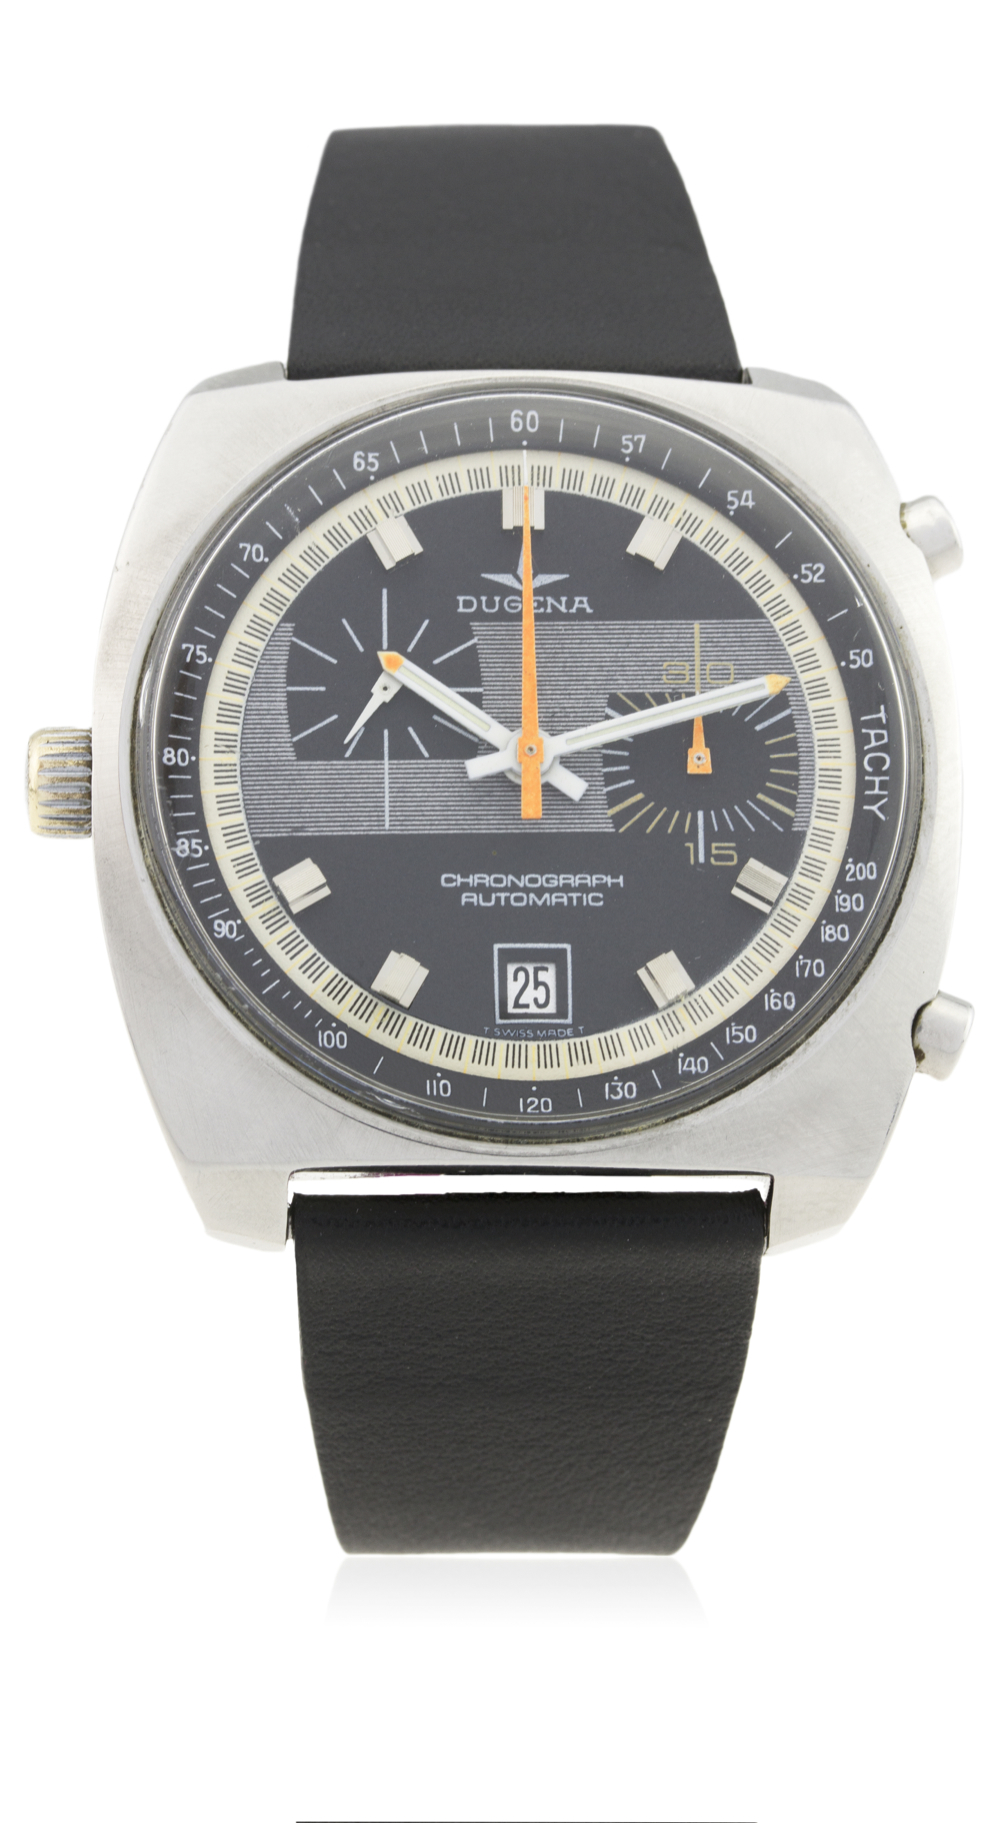 A RARE GENTLEMAN'S STAINLESS STEEL DUGENA "CALIBRE 15" AUTOMATIC CHRONOGRAPH WRIST WATCH CIRCA 1970s